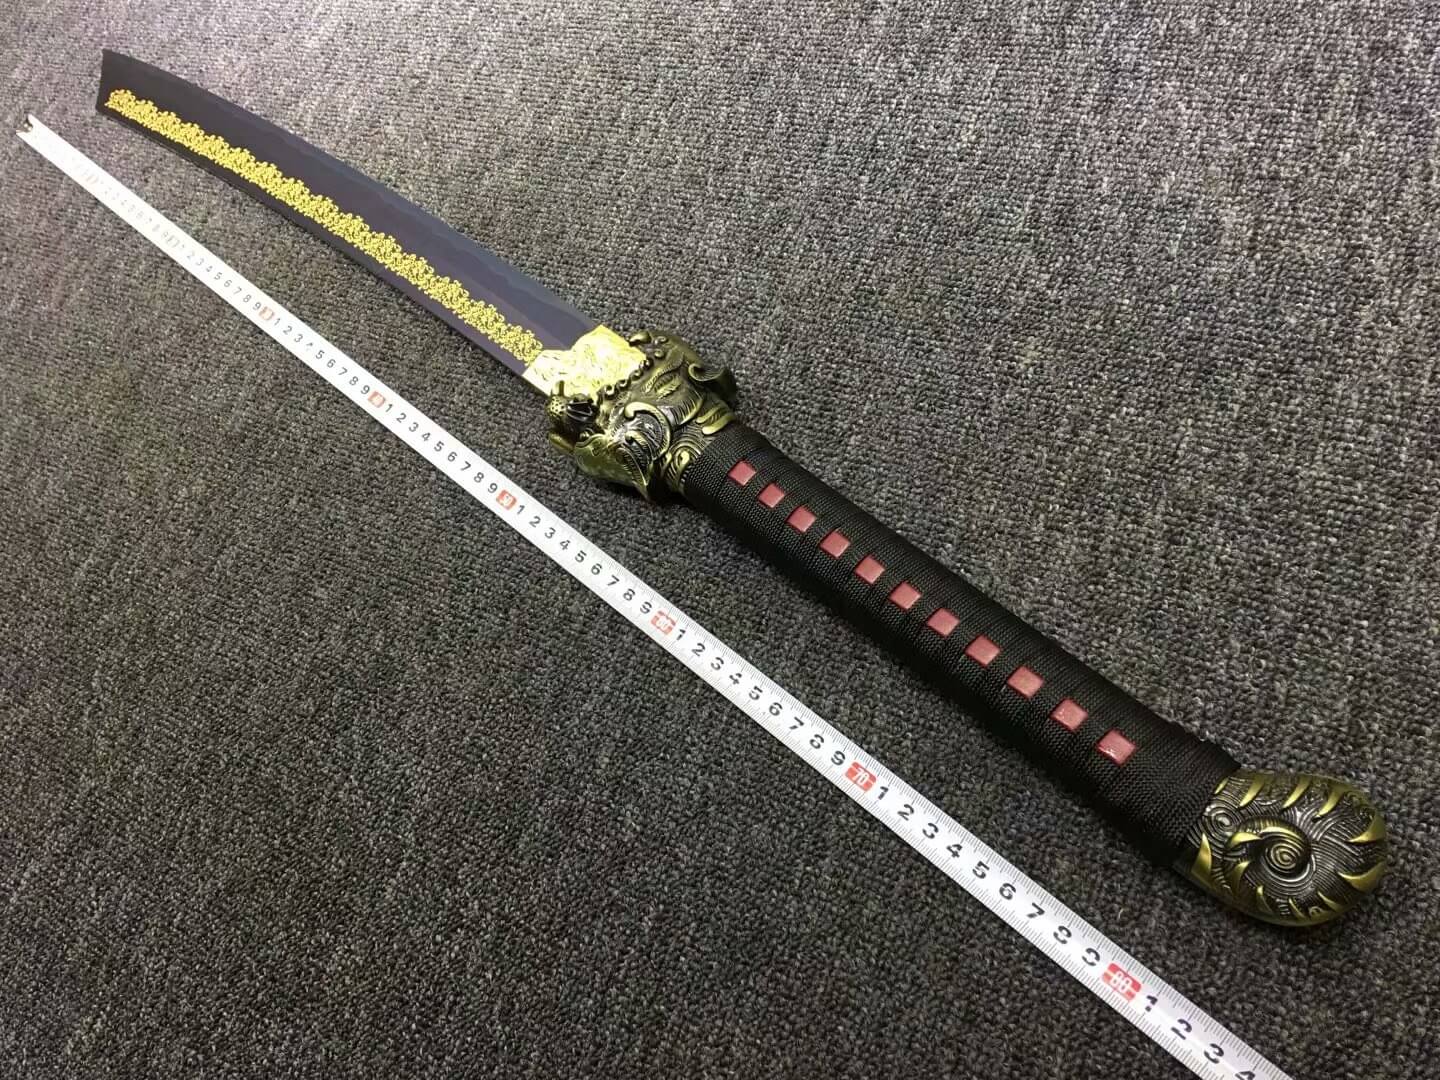 Tiger combating dao,High carbon steel blade,Leather scabbard,Alloy fitting - Chinese sword shop